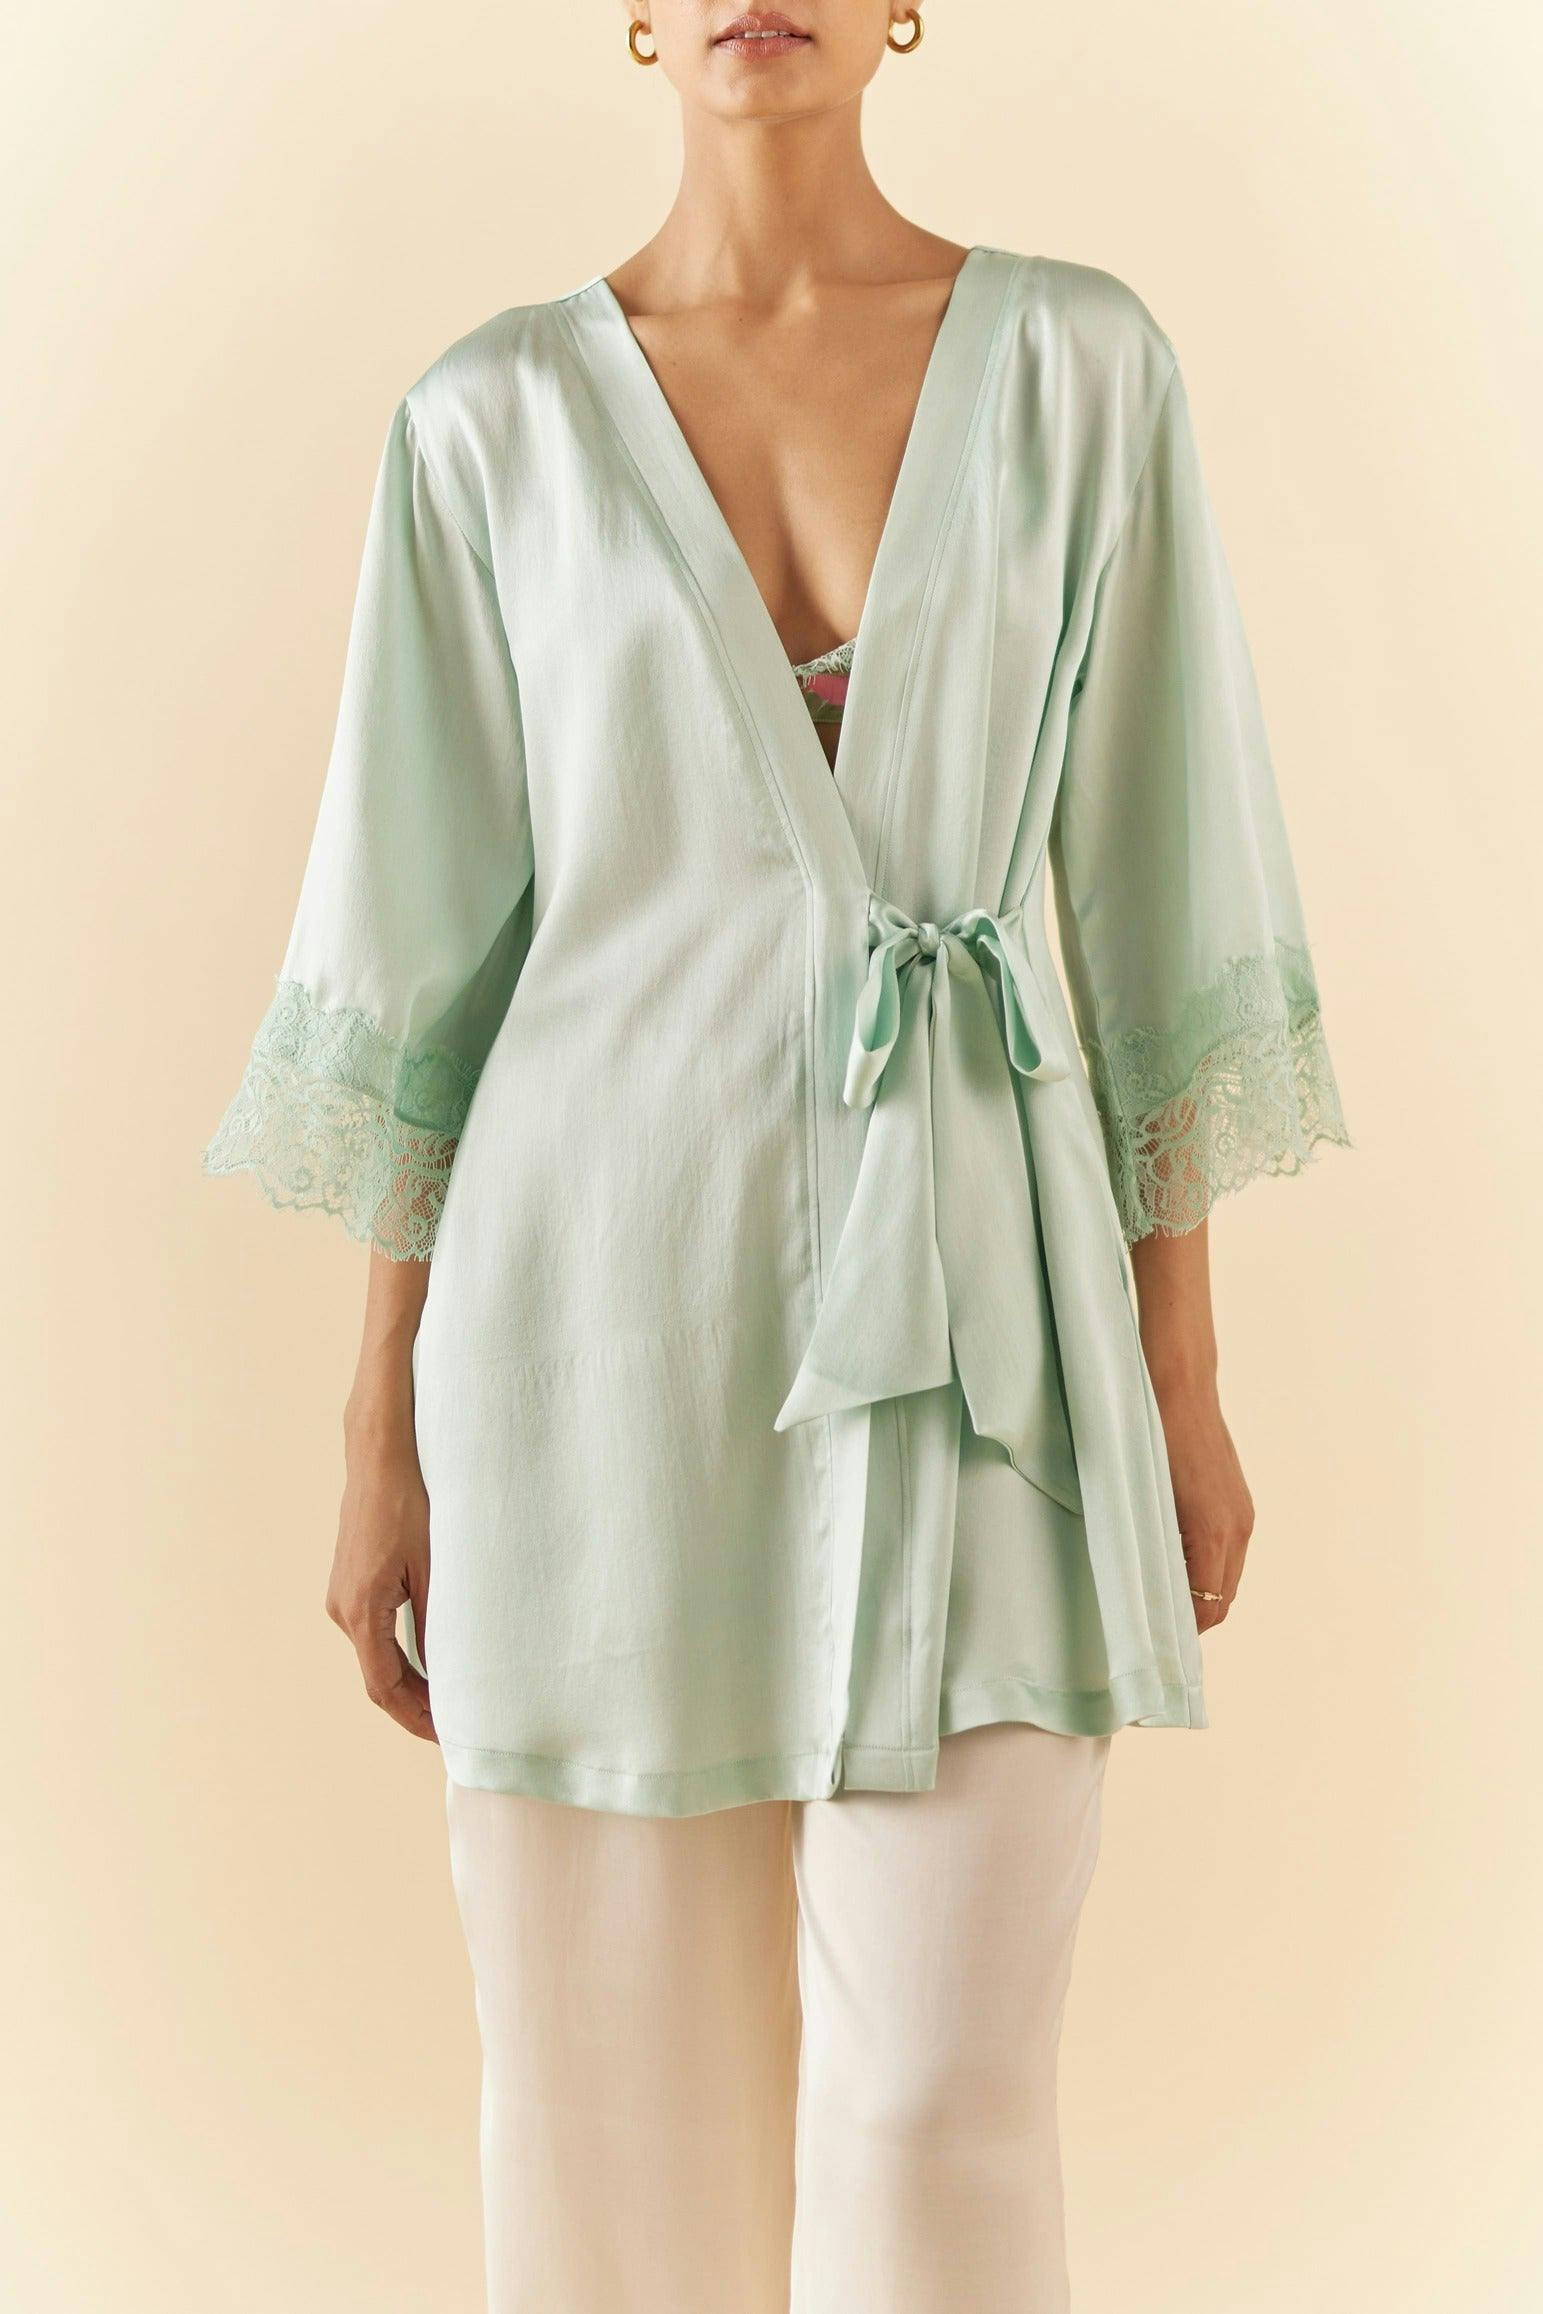 Thumbnail preview #1 for Pure Silk Robe in Celeste Blue